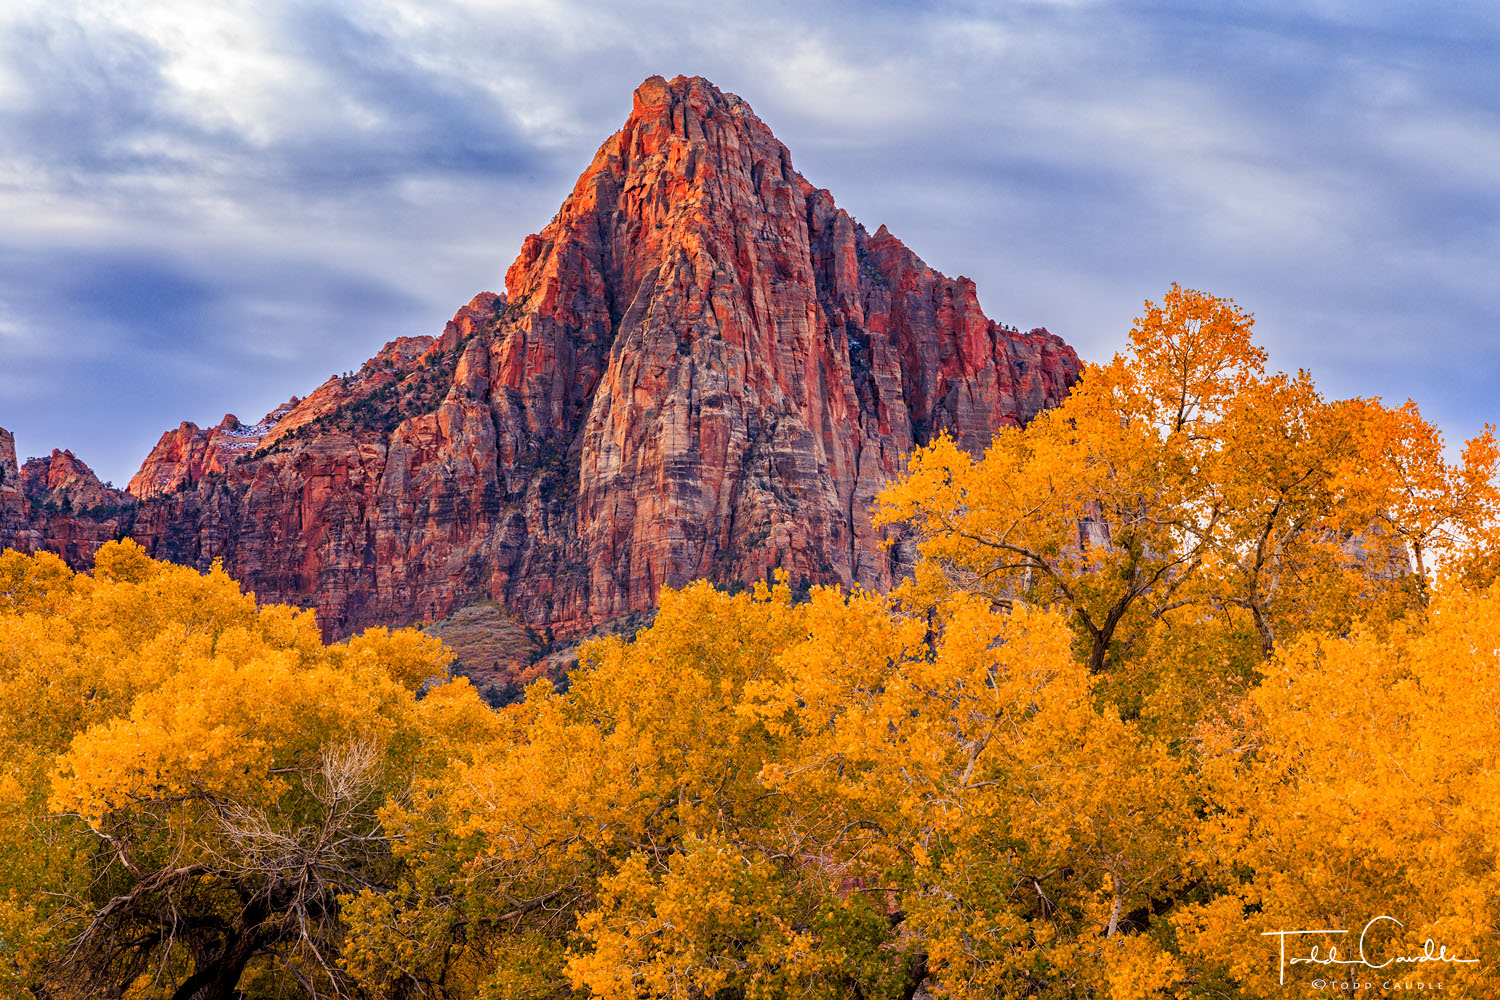 The Guardian rises above a grove of autumn cottonwoods in Zion National Park.